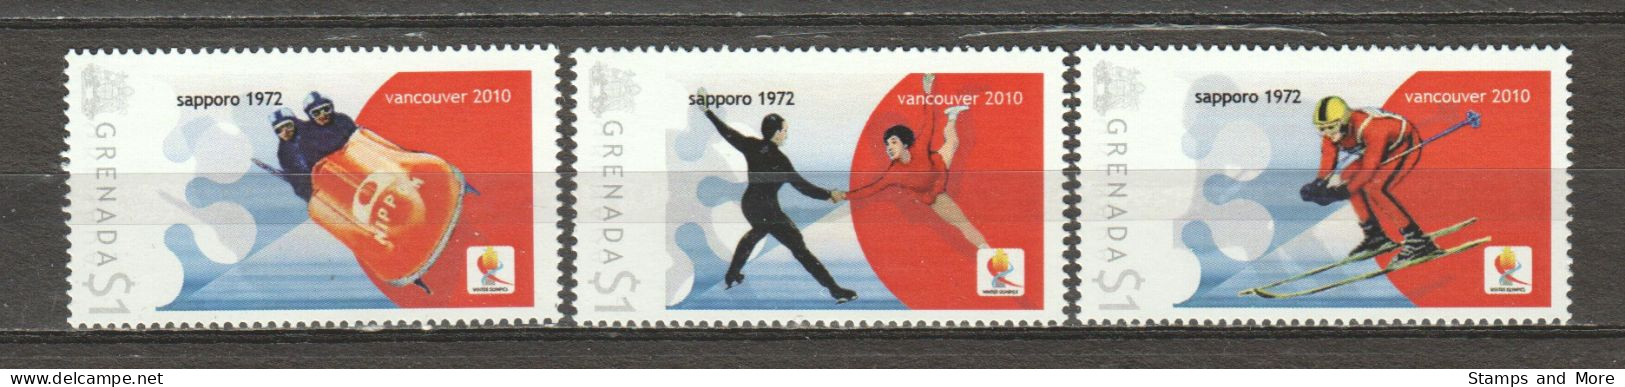 Grenada - Limited Edition Serie 11 MNH - WINTER OLYMPICS VANCOUVER 2010 - SAPPORO 1972 - Hiver 2010: Vancouver